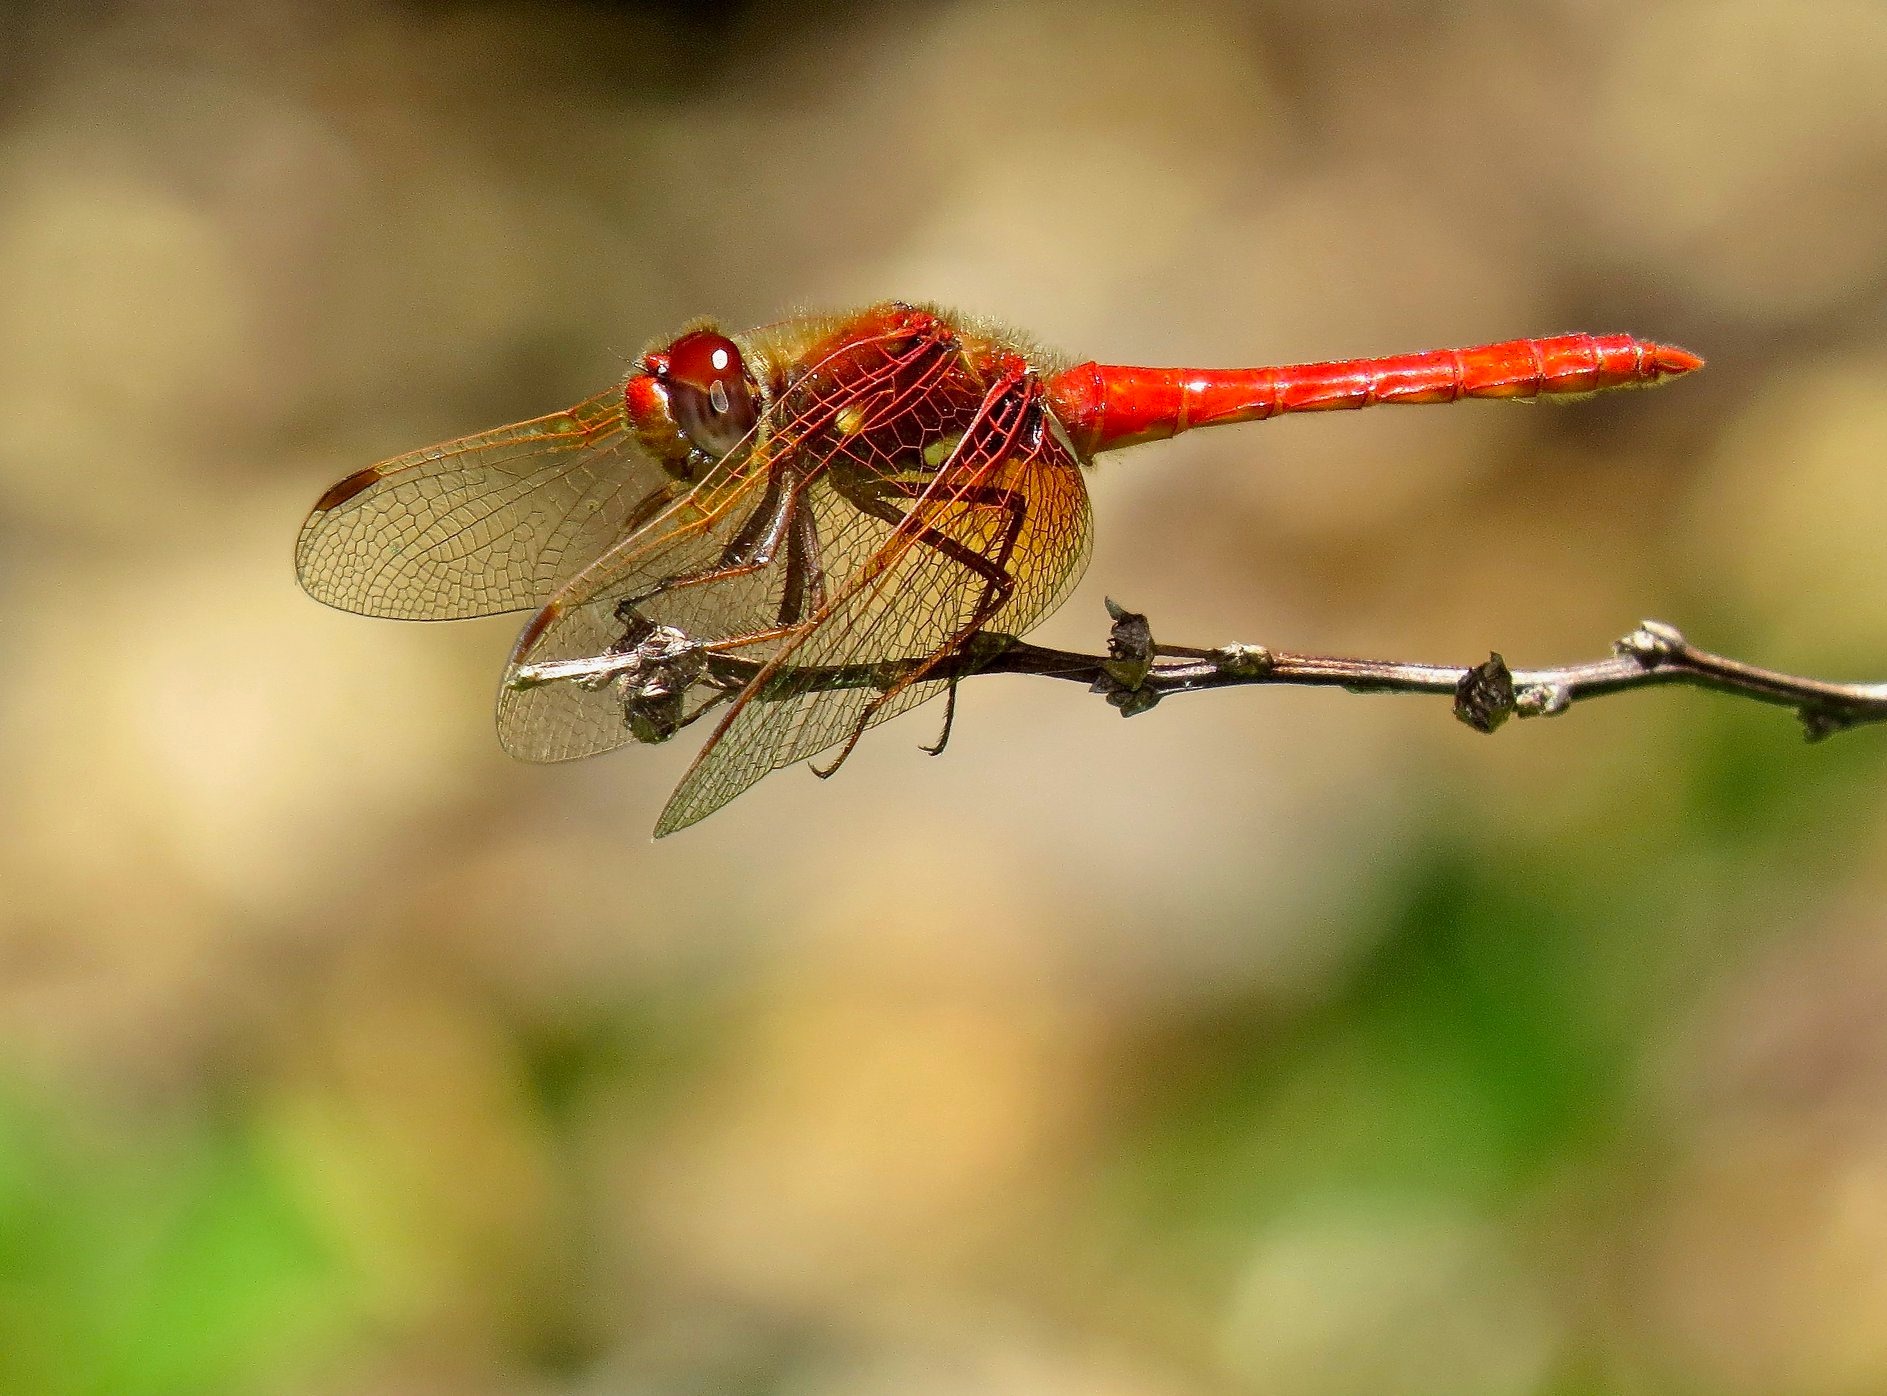 Red dragonfly perched on a twig